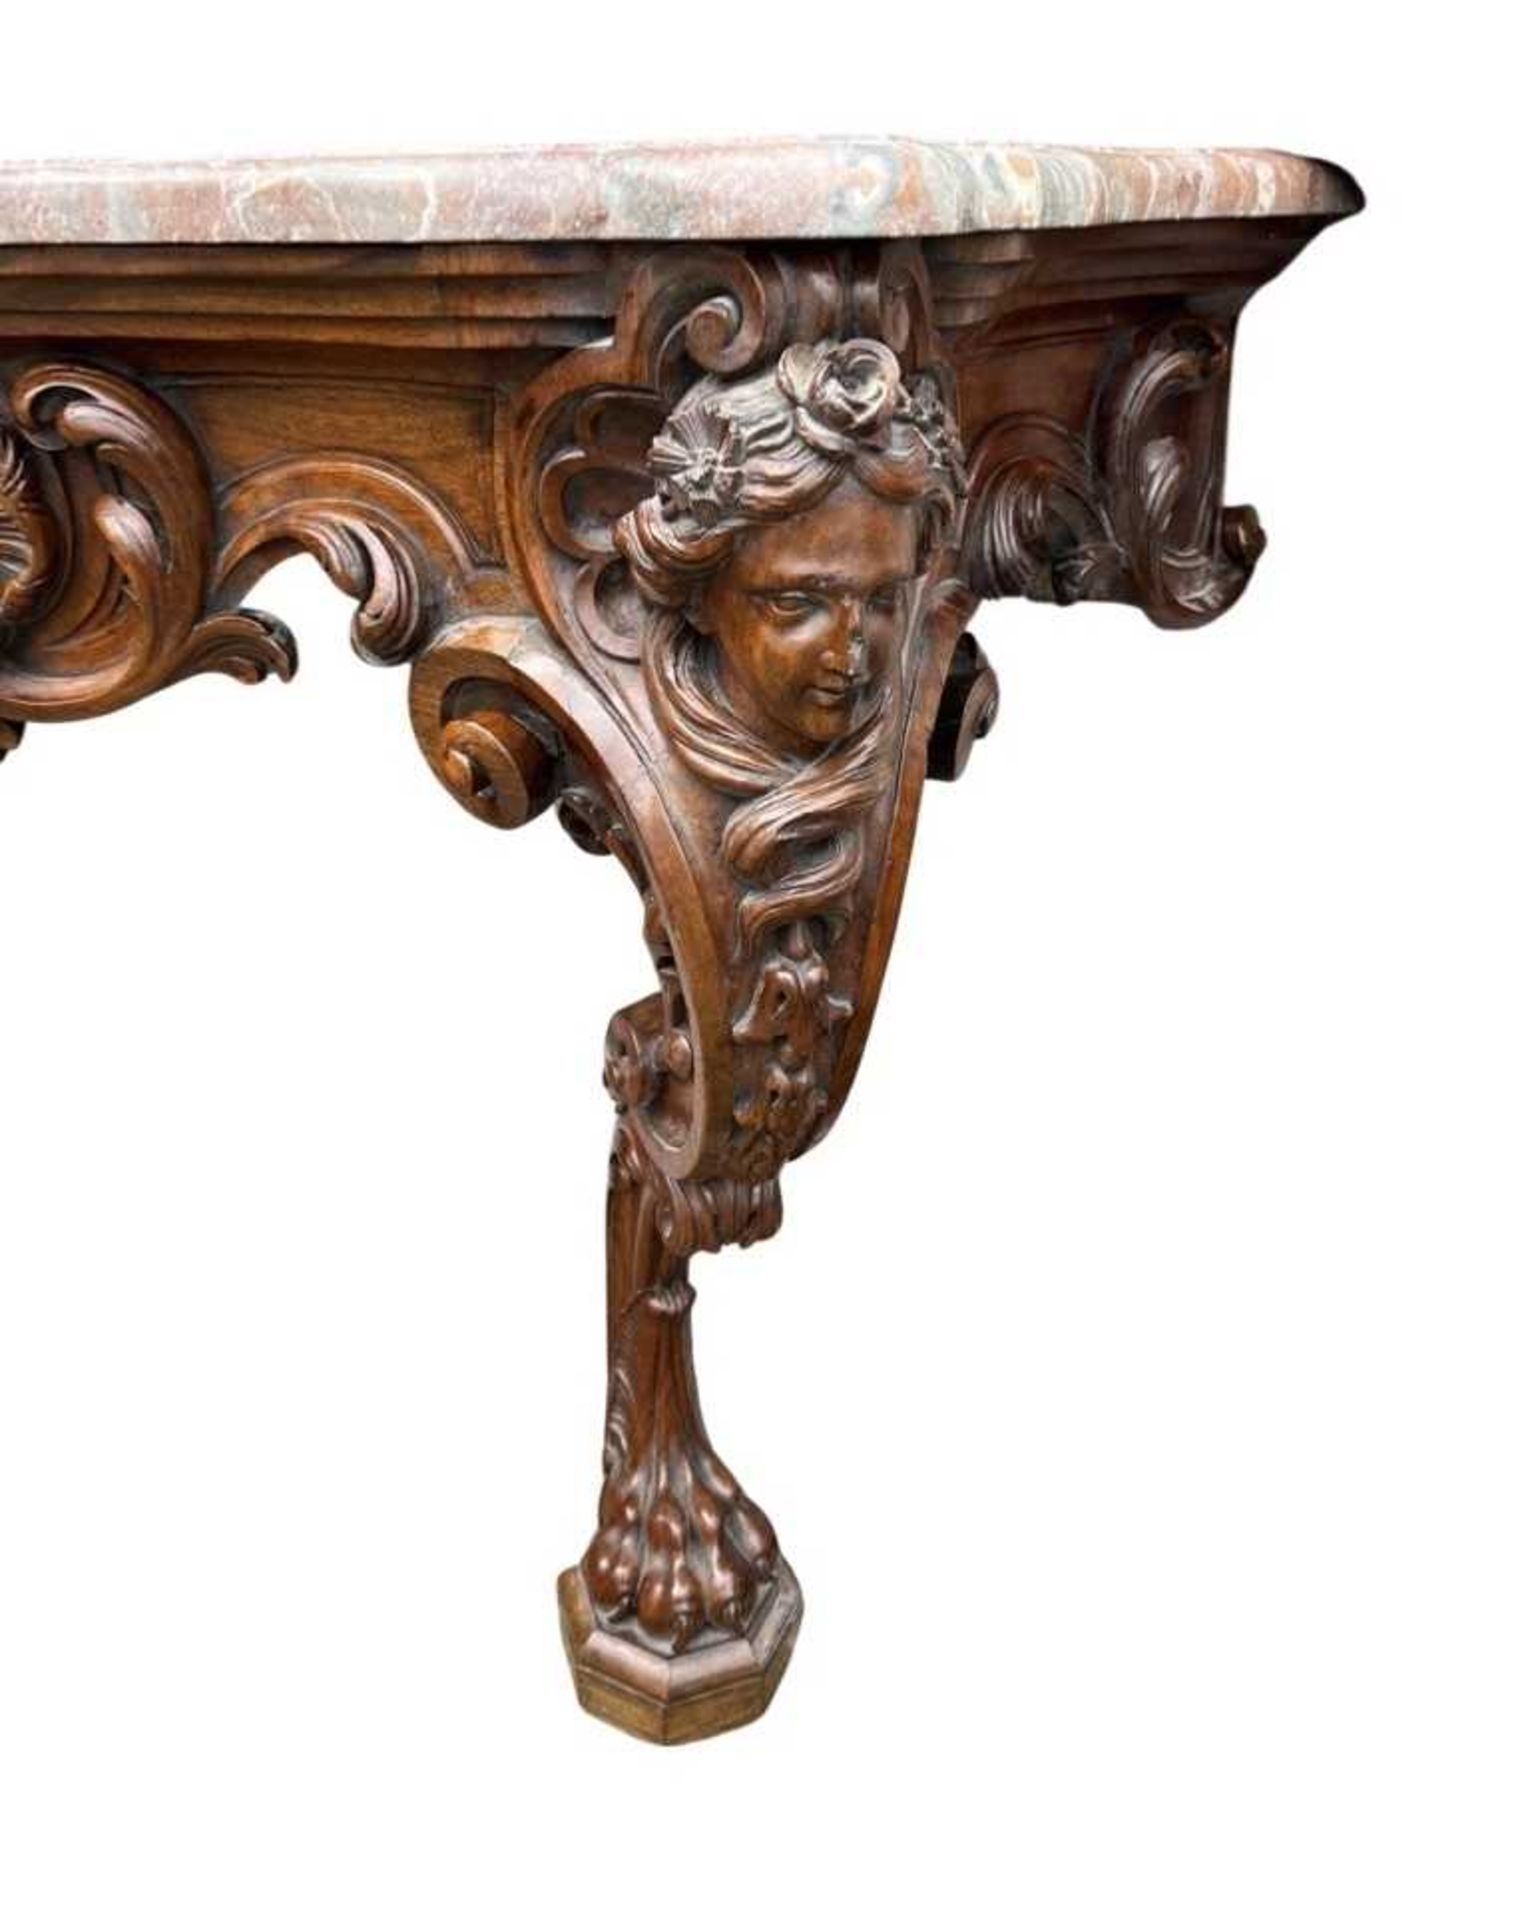 A FINE 19TH CENTURY IRISH WALNUT AND MARBLE CONSOLE TABLE - Image 4 of 5